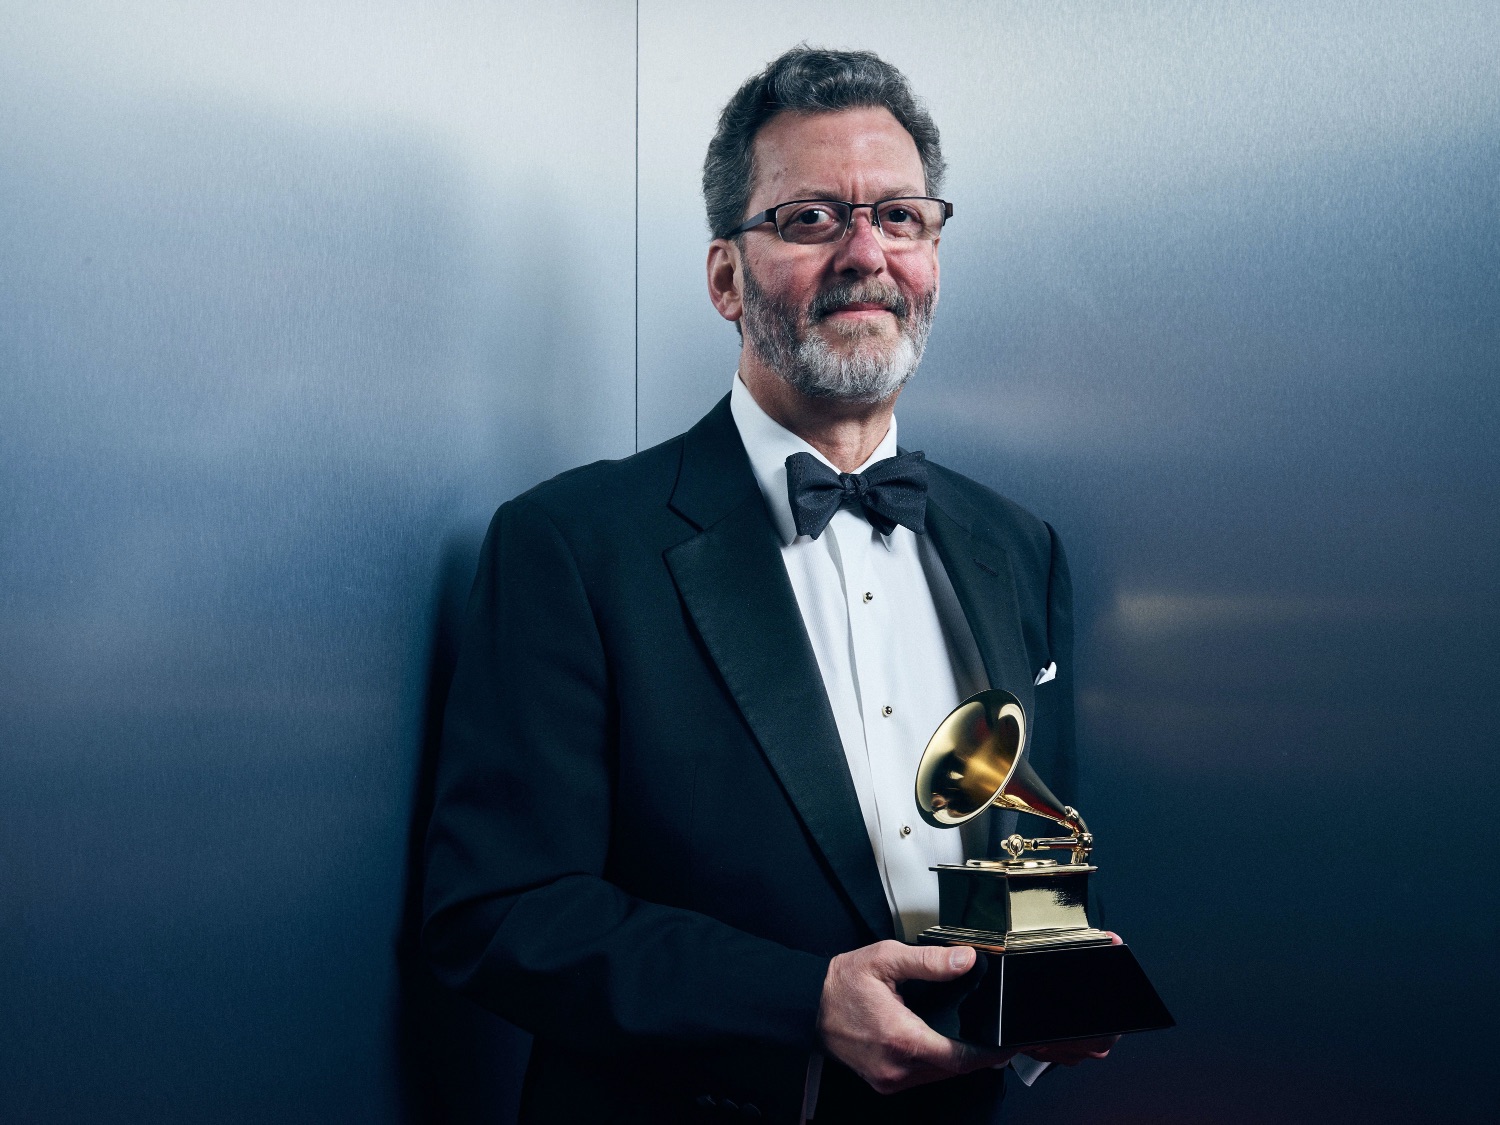 Alspaugh holds one of his previously won Grammys.